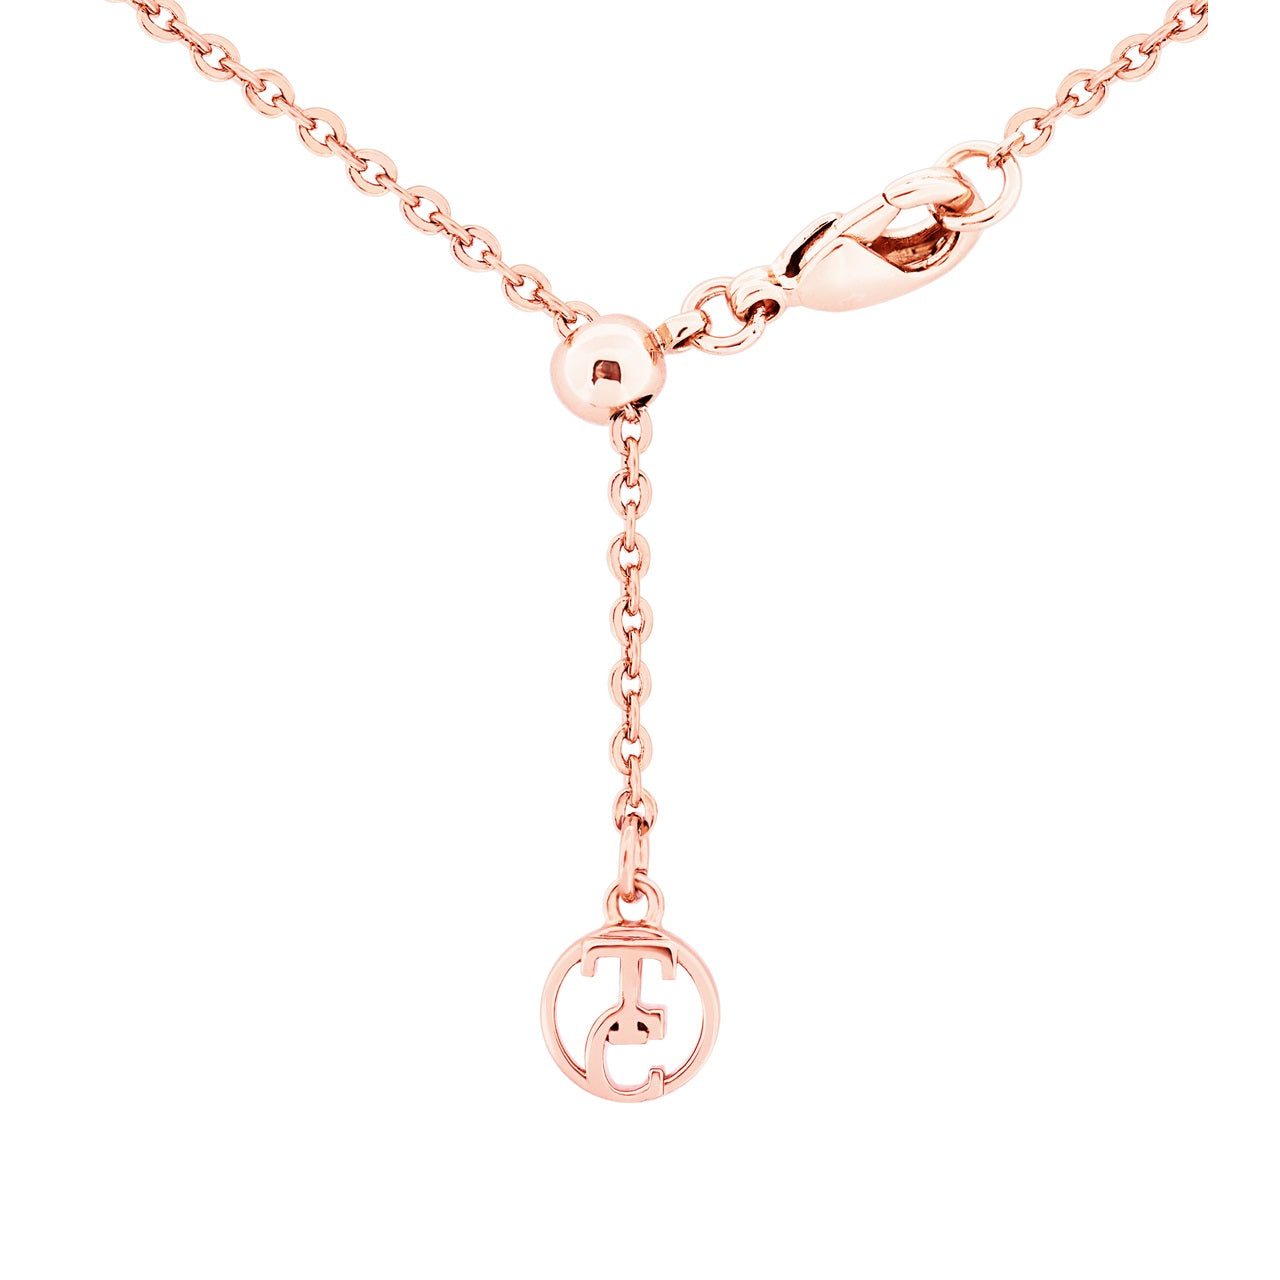 Tipperary Crystal Butterfly Circle Pendant  Fashioned in rose gold this beady circular pendant with bale. In the middle sits butterfly with pink pearlescent enamel infill. It suspends from a cable chain with adjustable slider and lobster claw clasp.